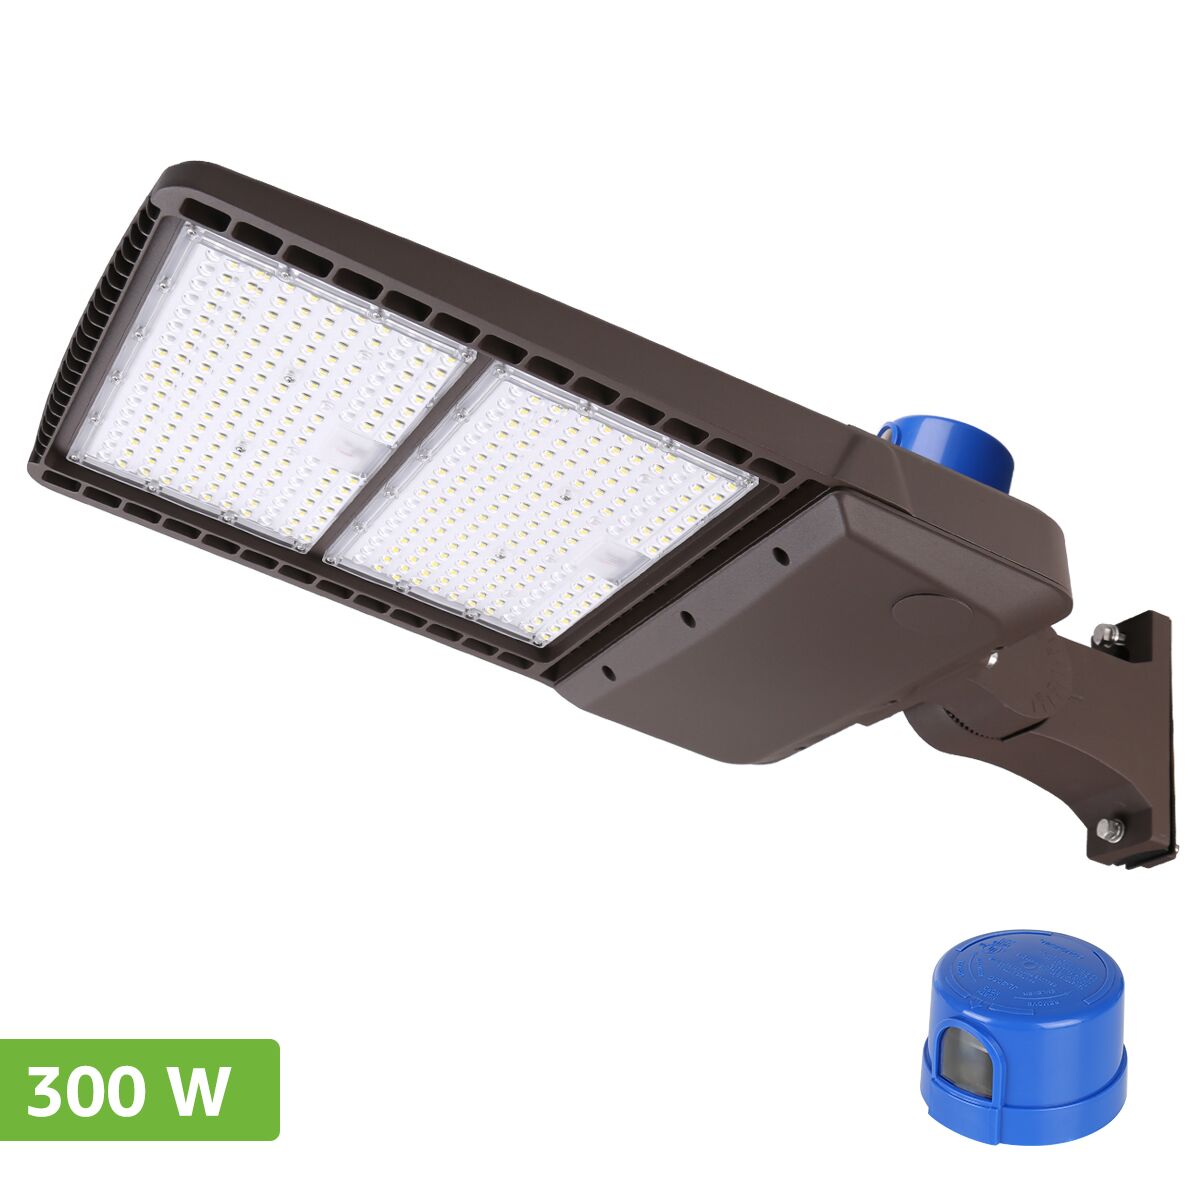 Details about   480V 300W LED Parking Lot Shoebox Lights with Direct Arms Mount,1000W MH Equiv. 